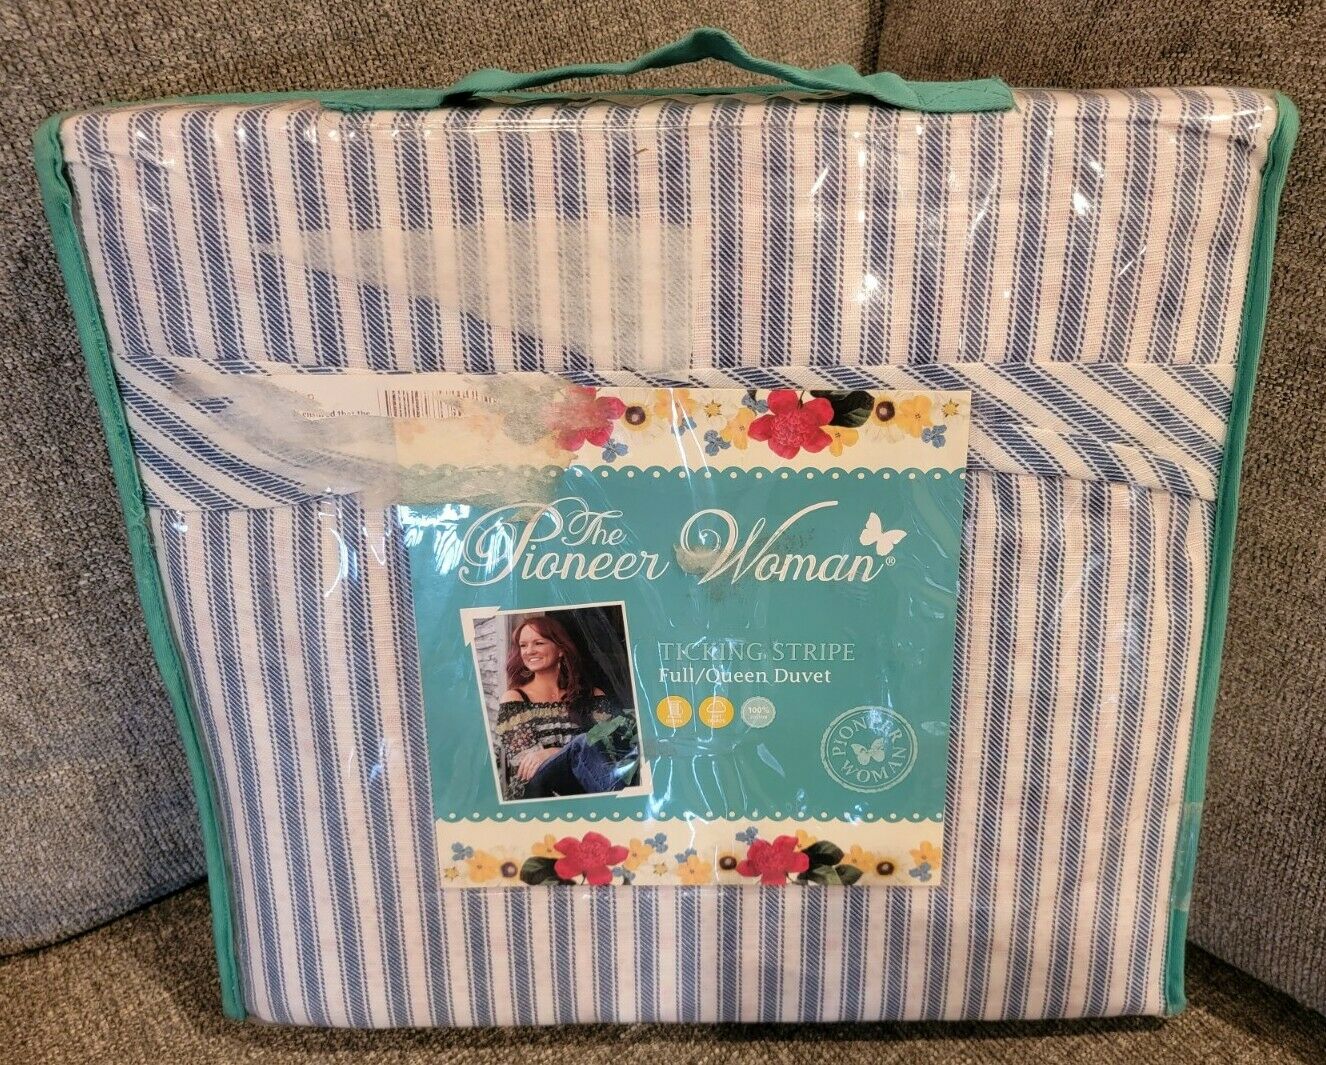 NEW! The Pioneer Woman Full/Queen Duvet Ticking Stripe Pattern * 100% Cotton